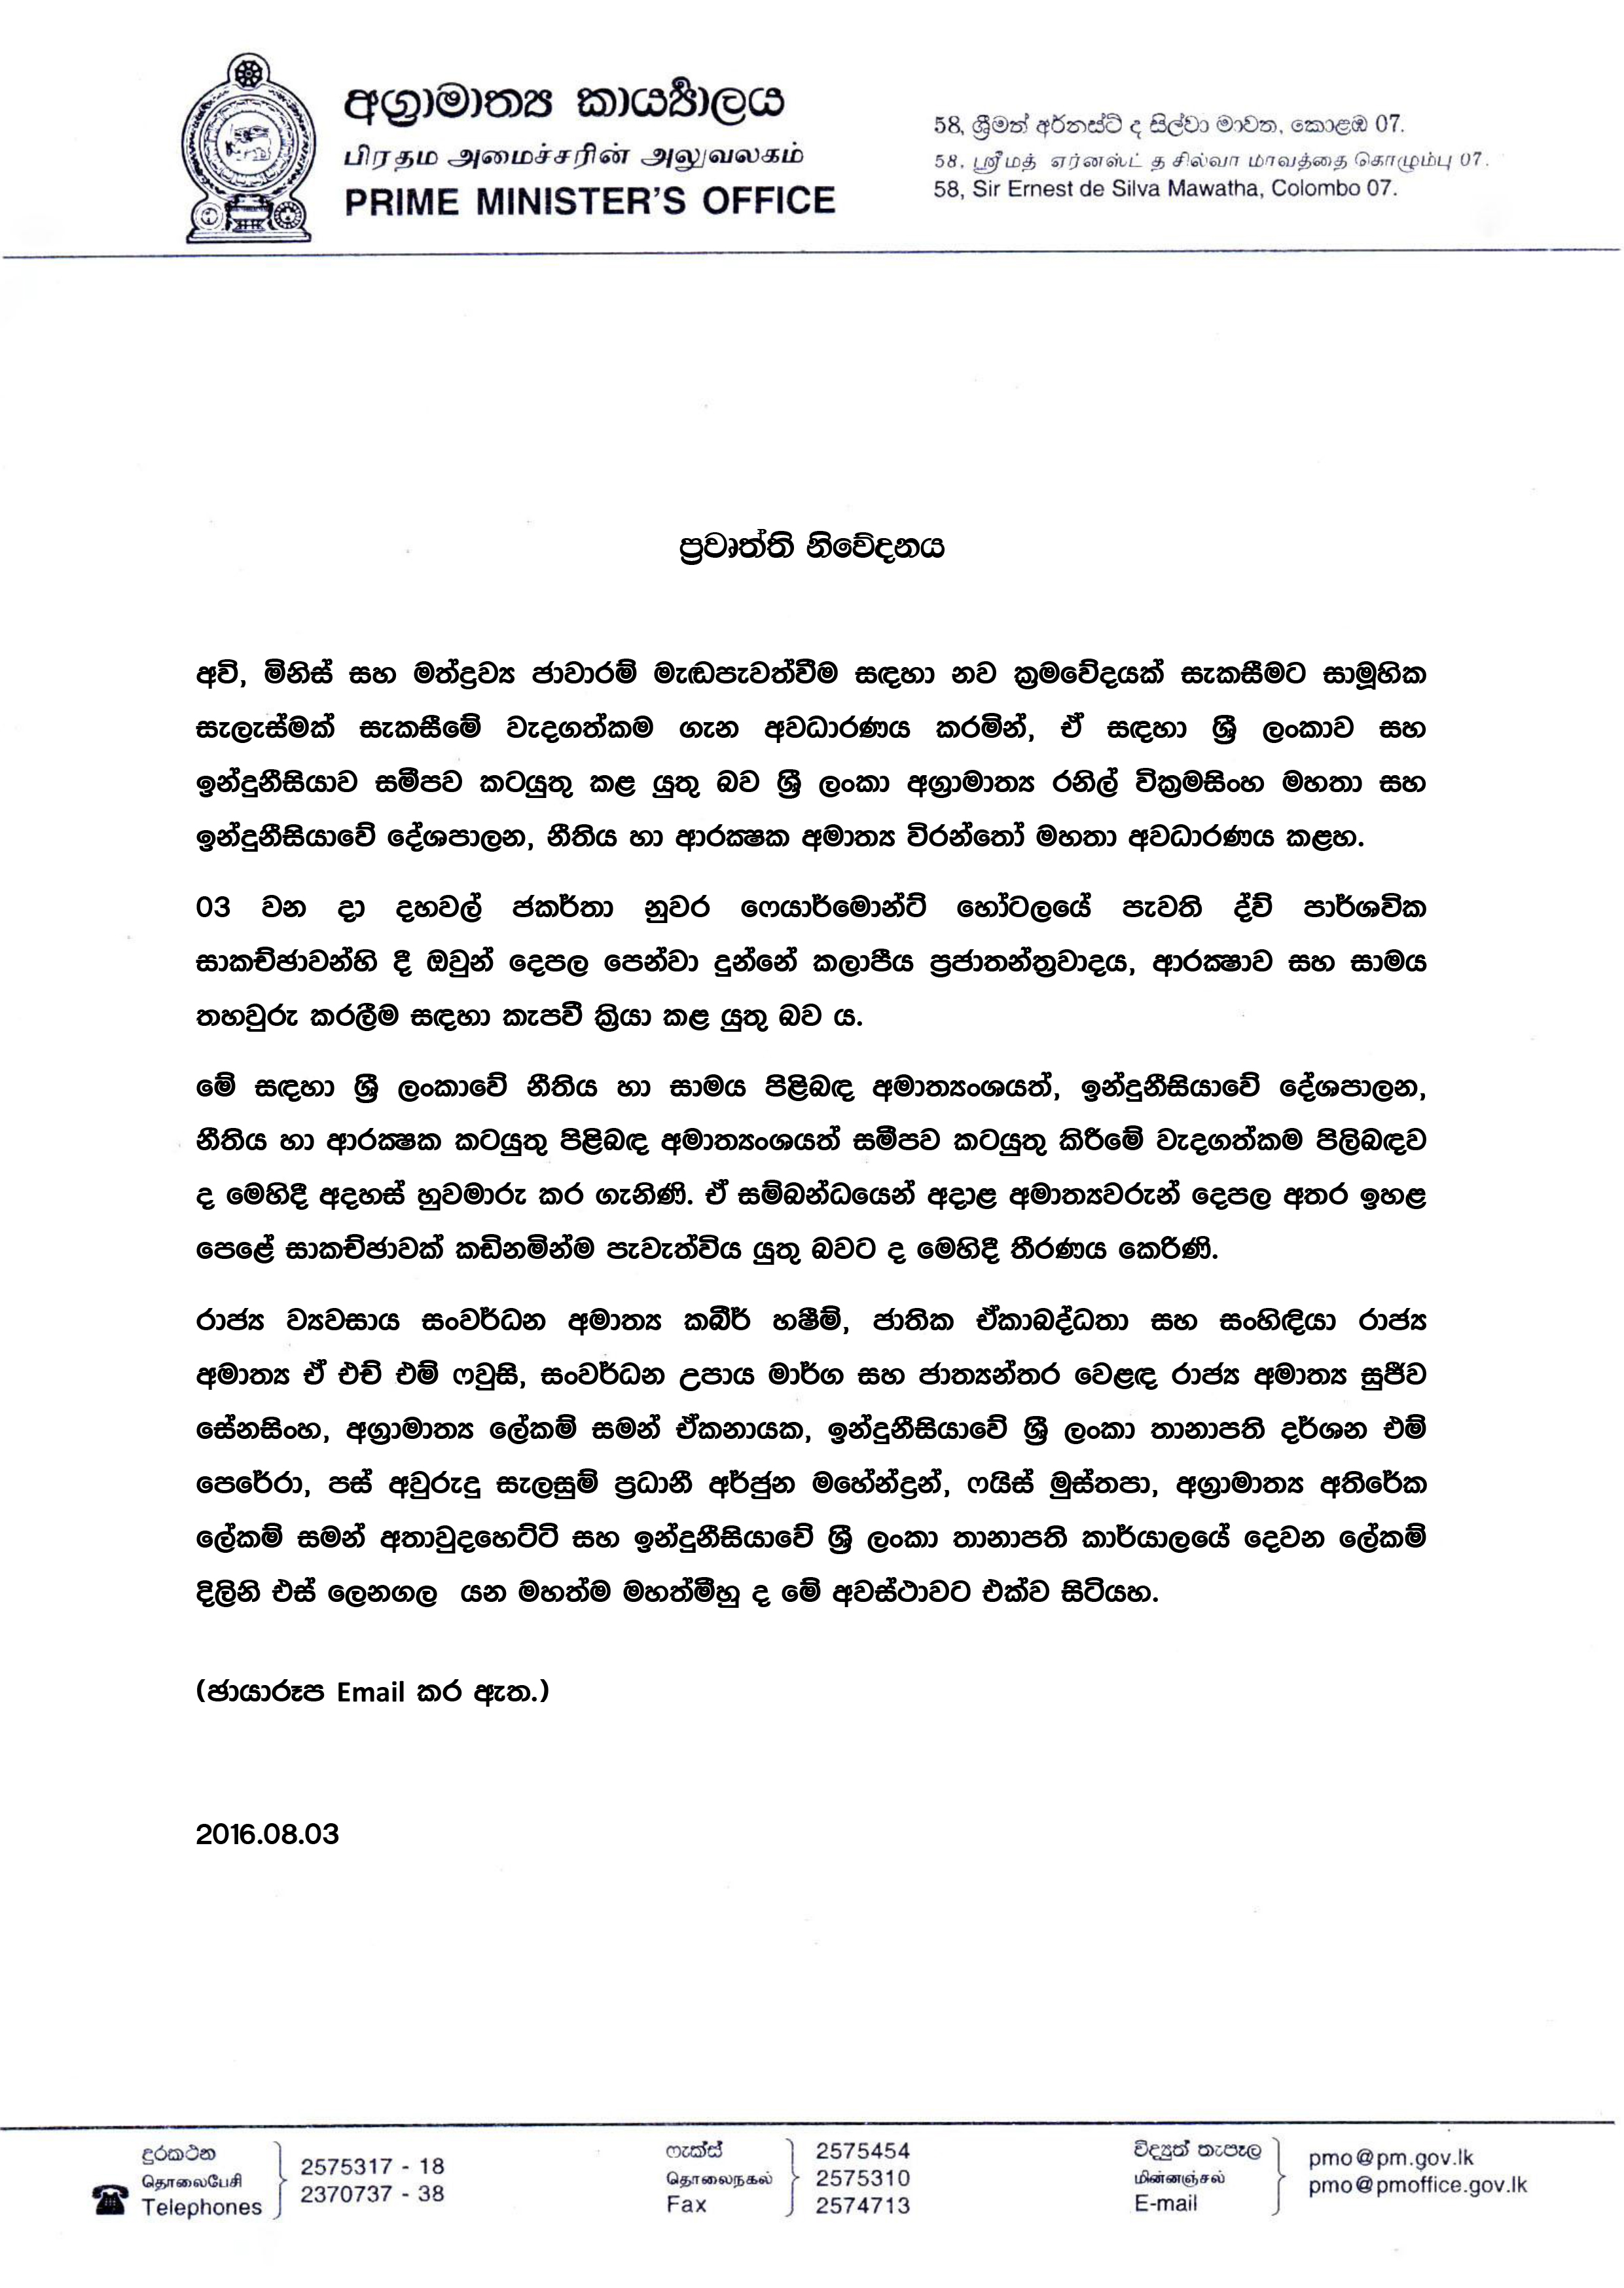 Press Release (3) - August 03_2016